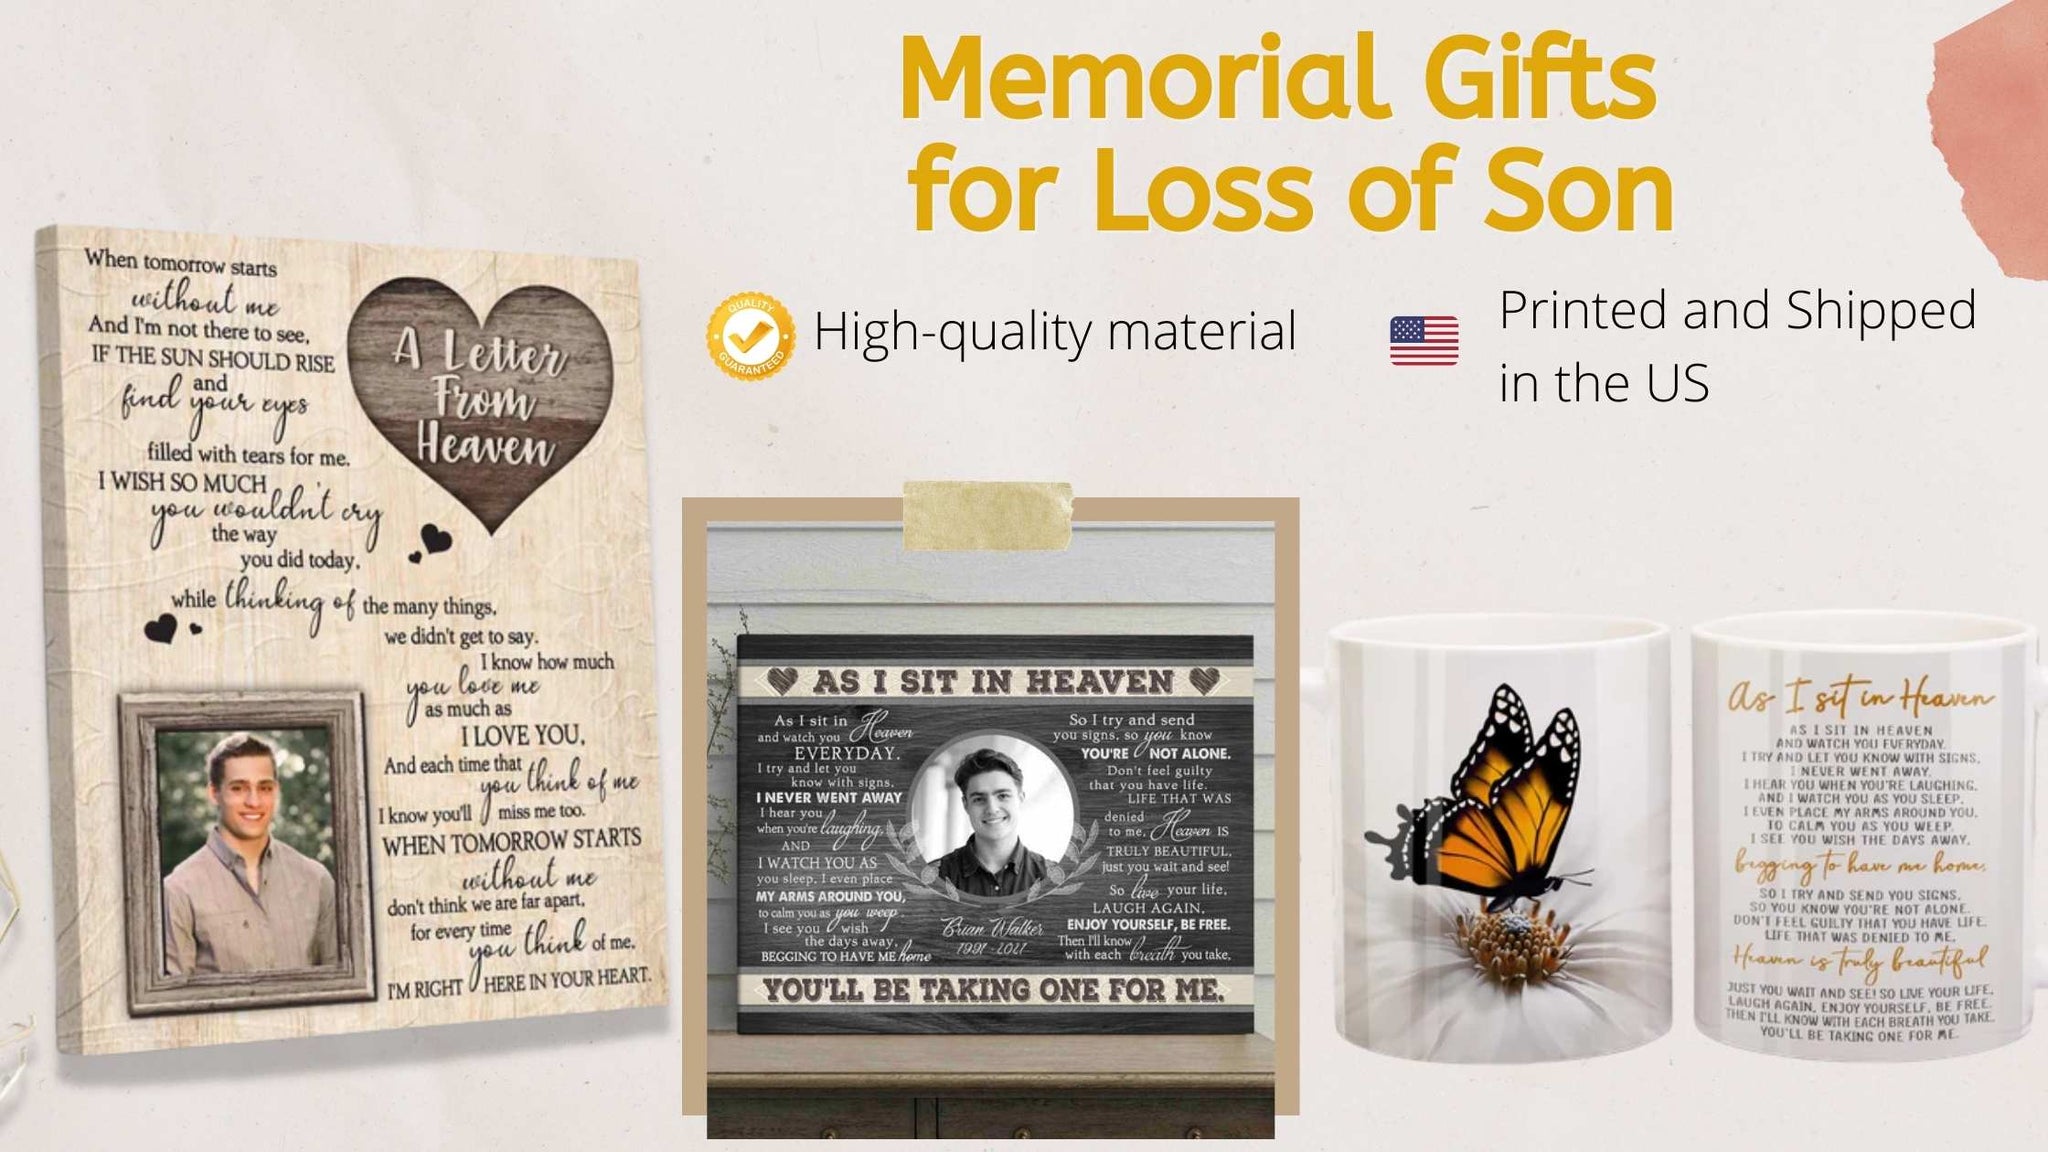 memorial gifts for loss of son, memorial gifts for loss of daughter